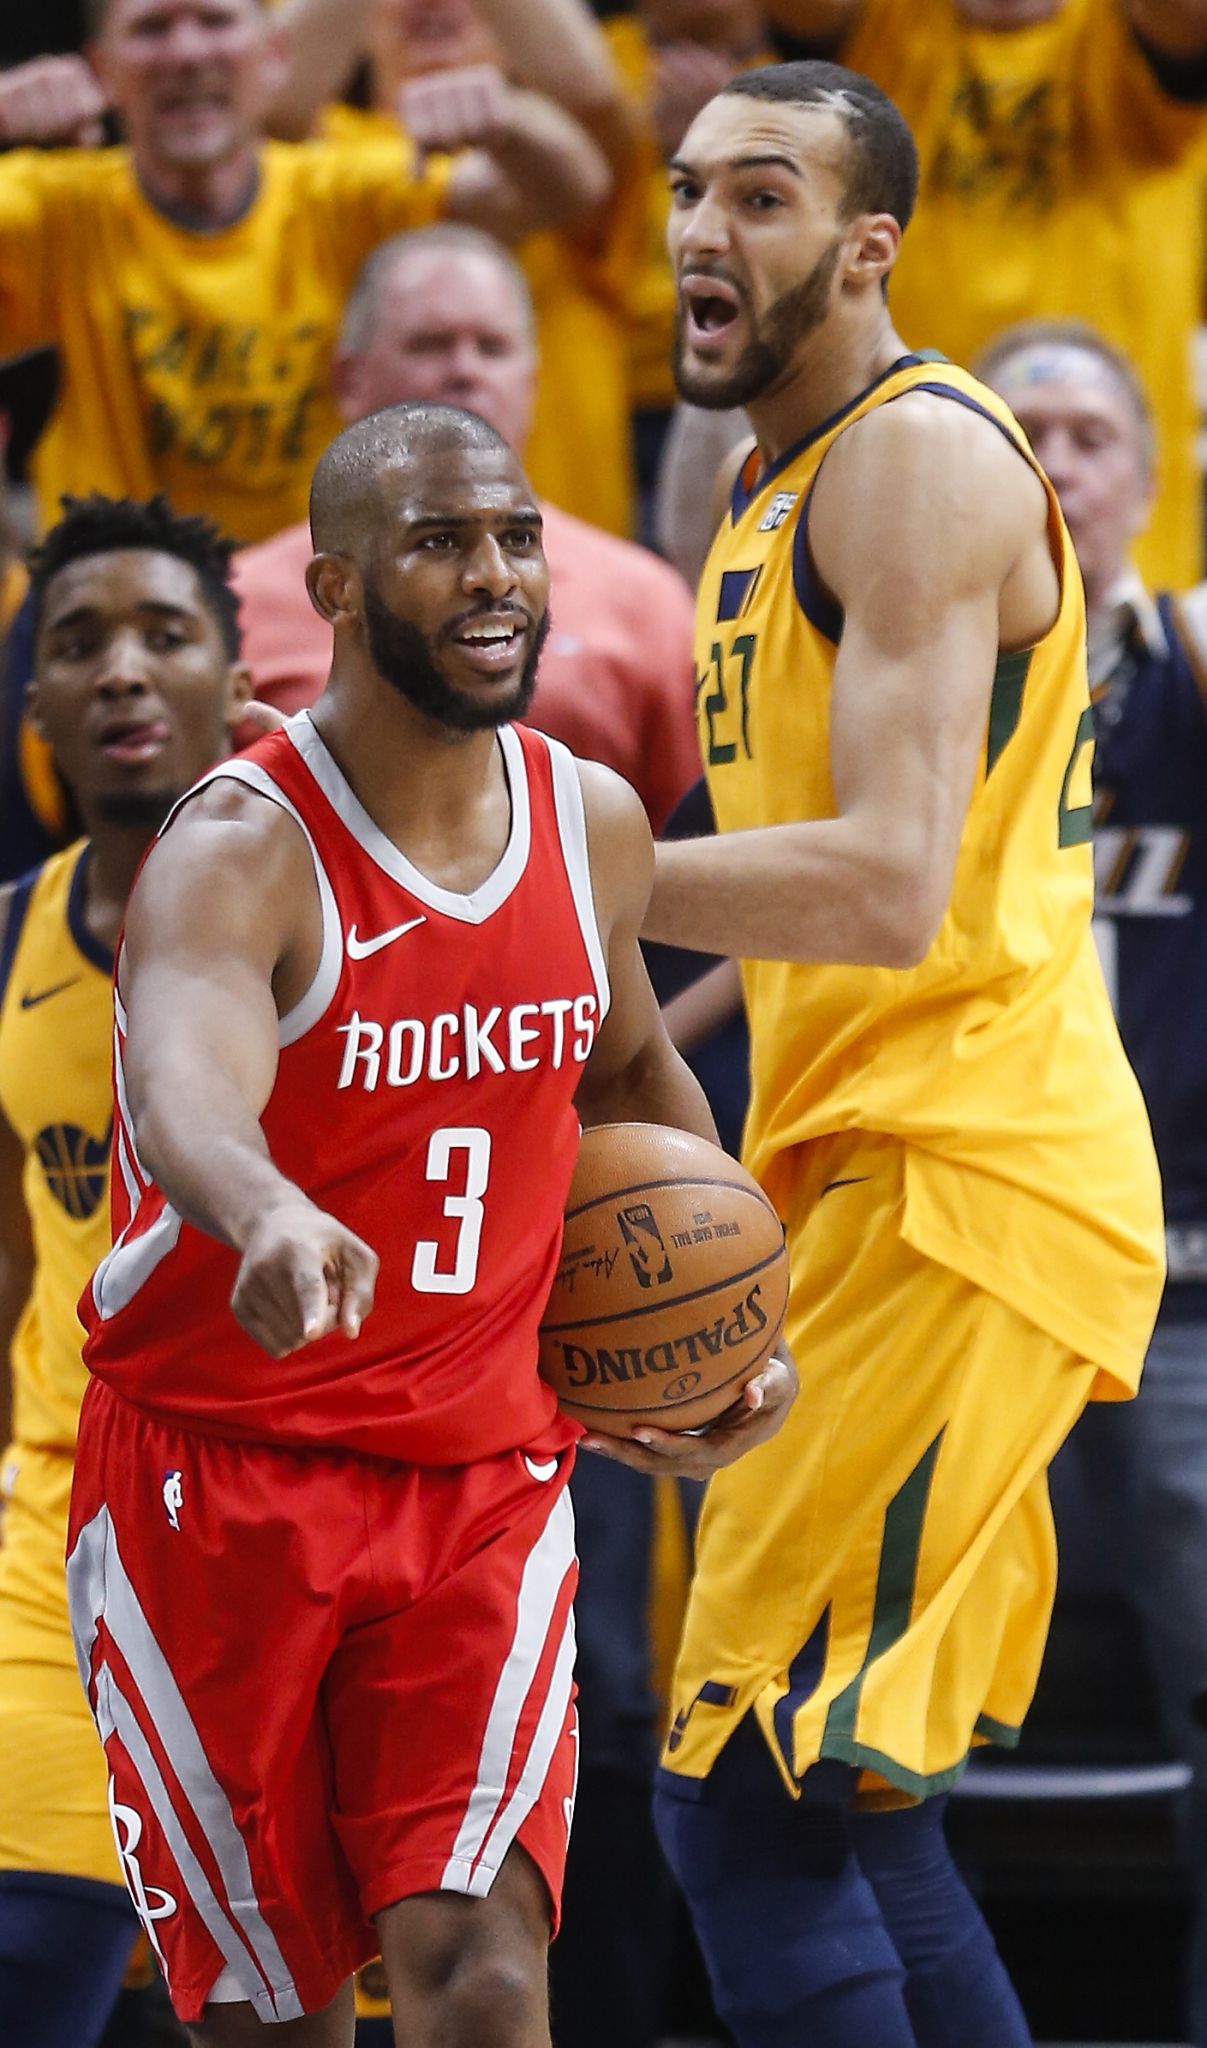 James Harden and Chris Paul feel cold in Salt Lake City, but they have made  a connection with Jazz star Donovan Mitchell